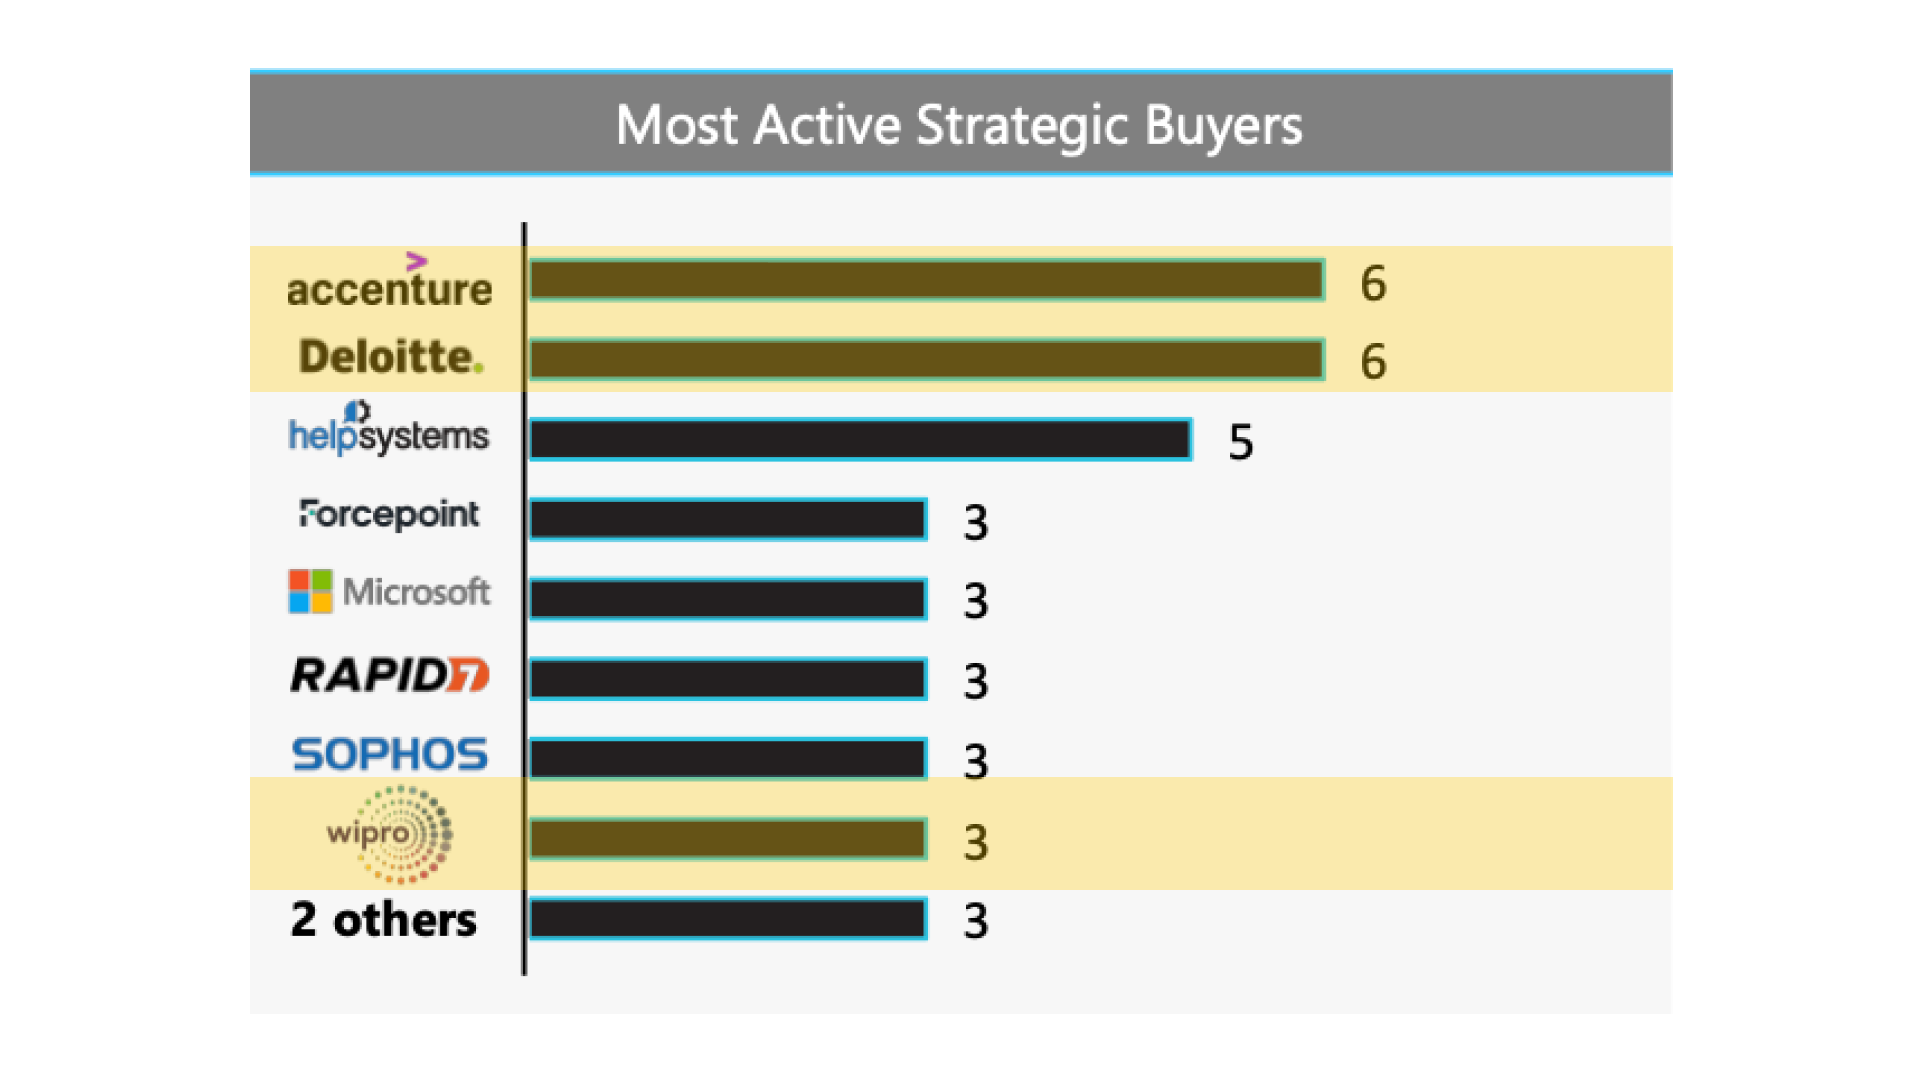 Most active strategic buyers in cybersecurity.